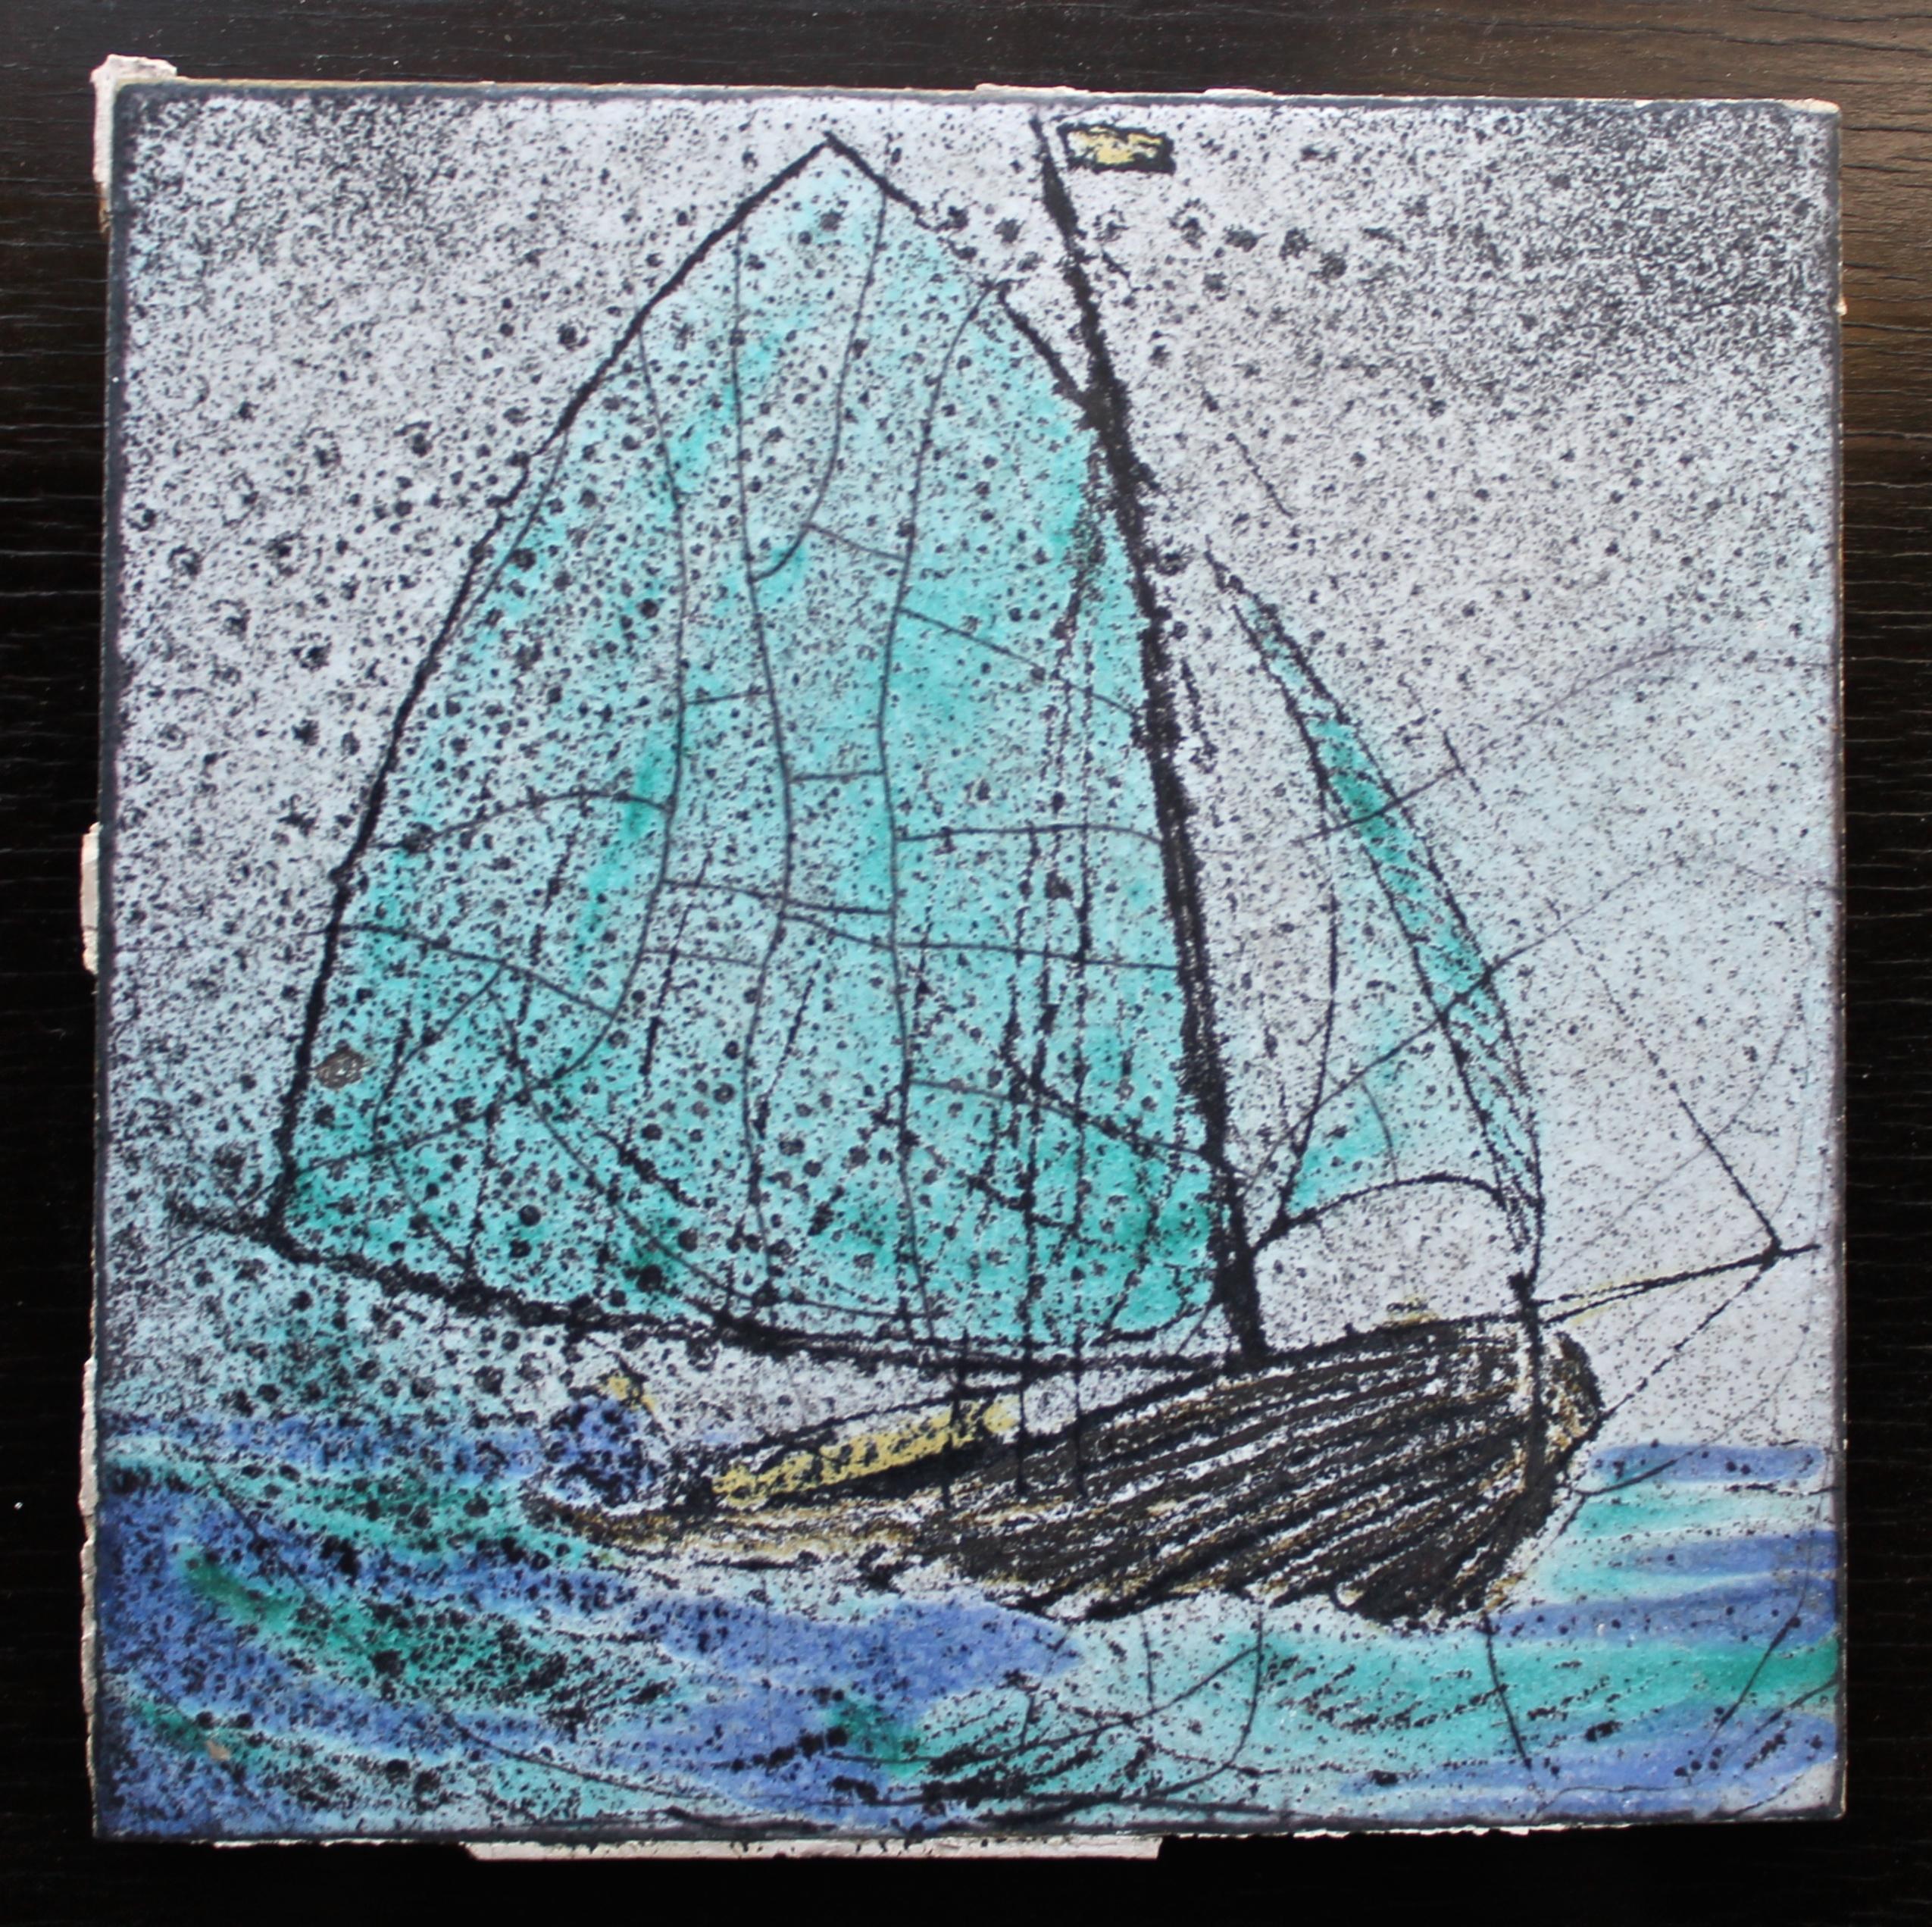 Each tile a unique painting of a different sailing vessel on the high sea. Each 5 1/4